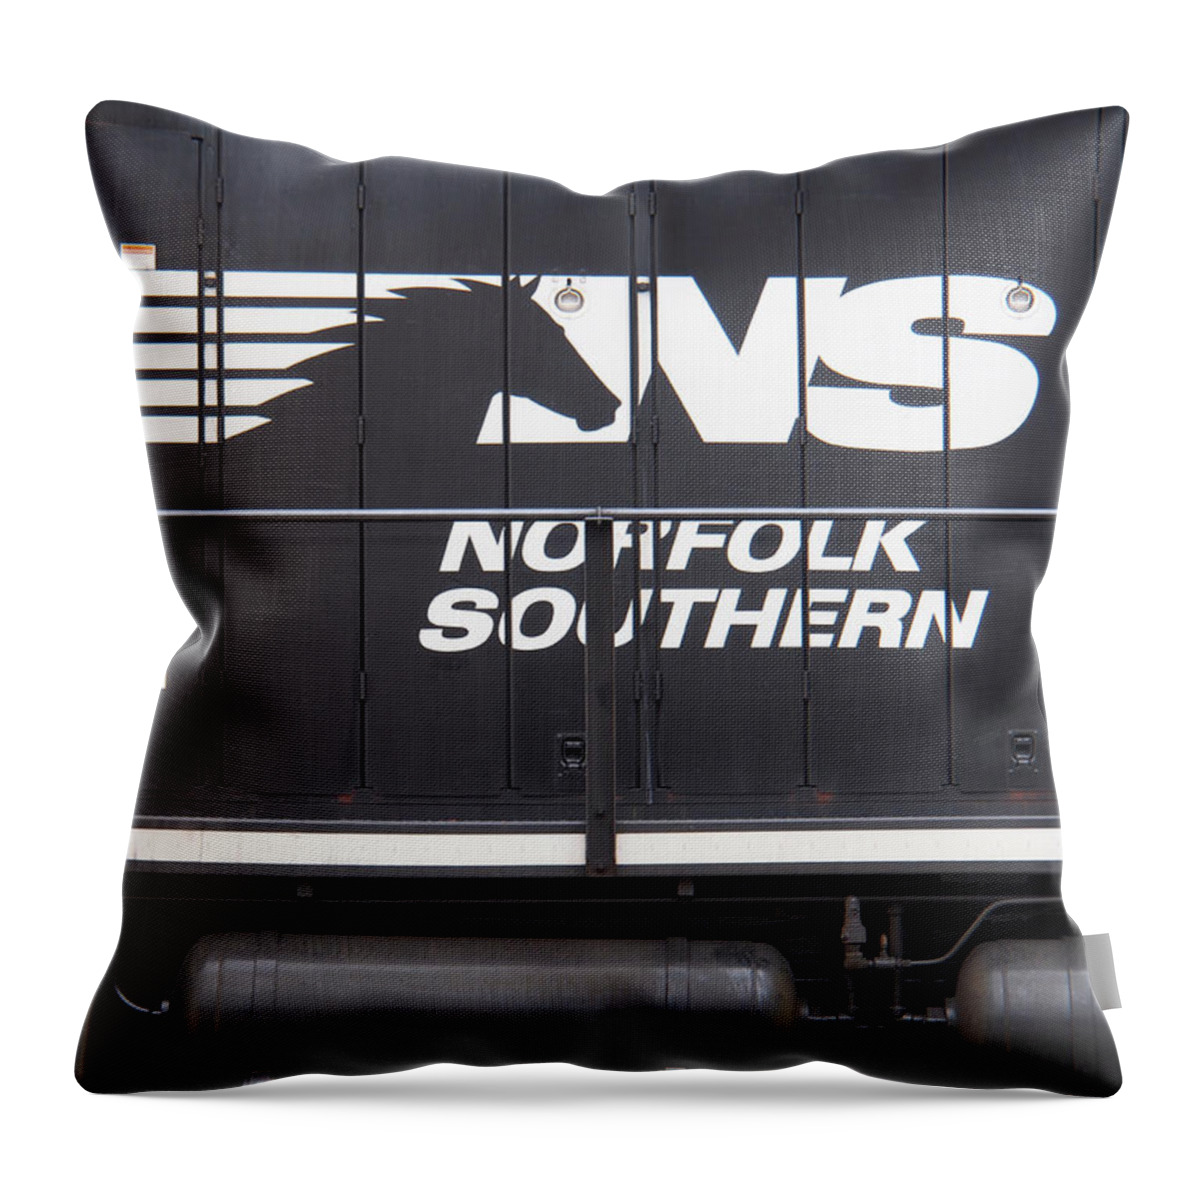 Railroad Throw Pillow featuring the photograph Norfolk Southern Emblem by Mike McGlothlen